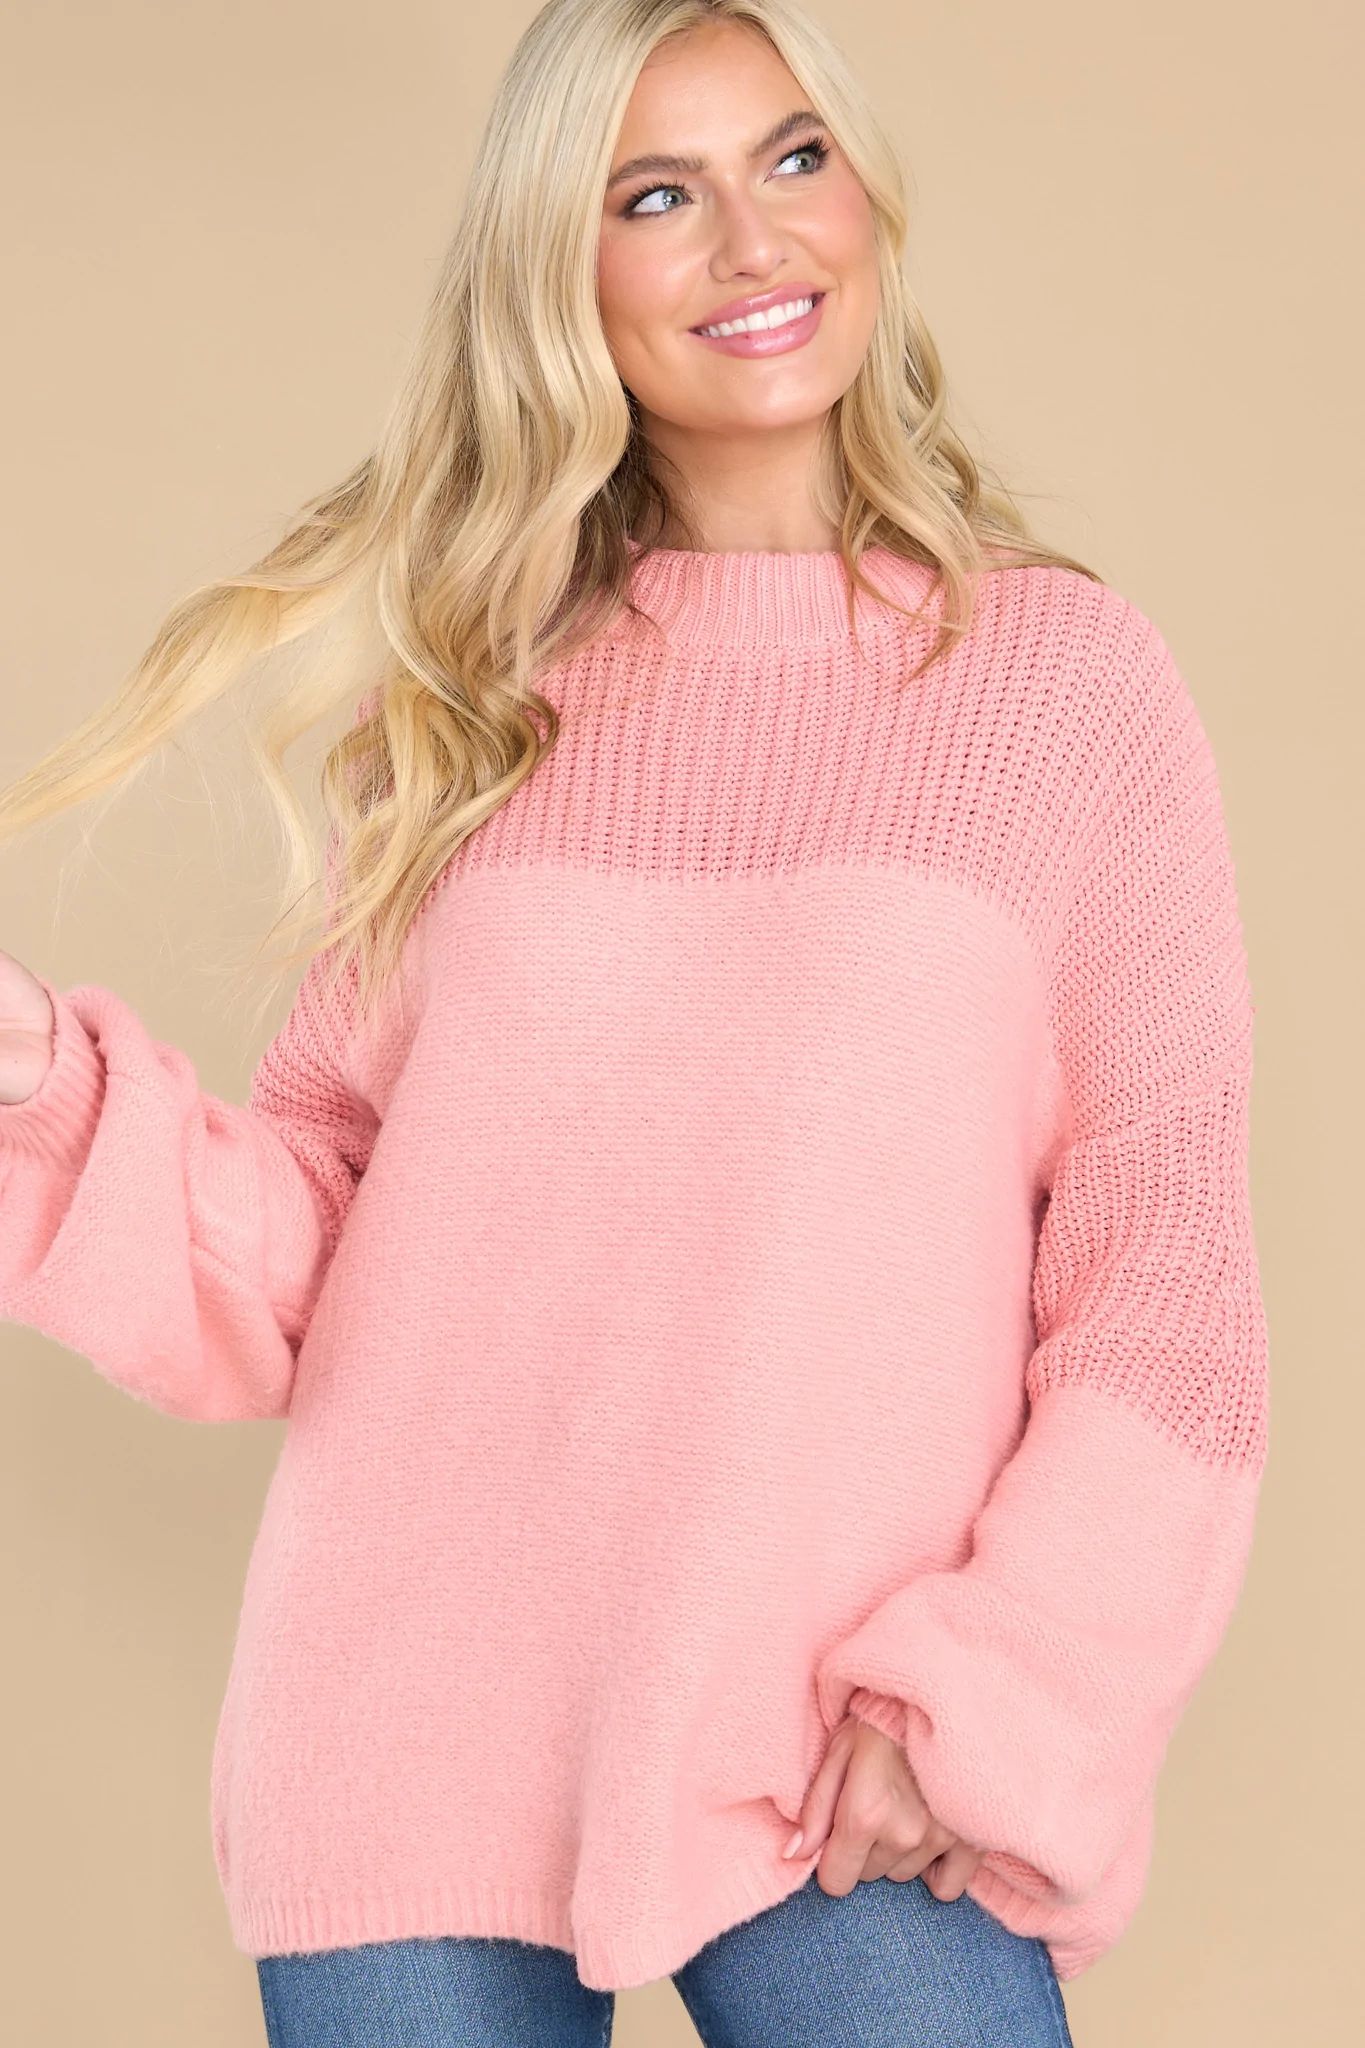 Homebody At Heart Light Pink Sweater | Red Dress 